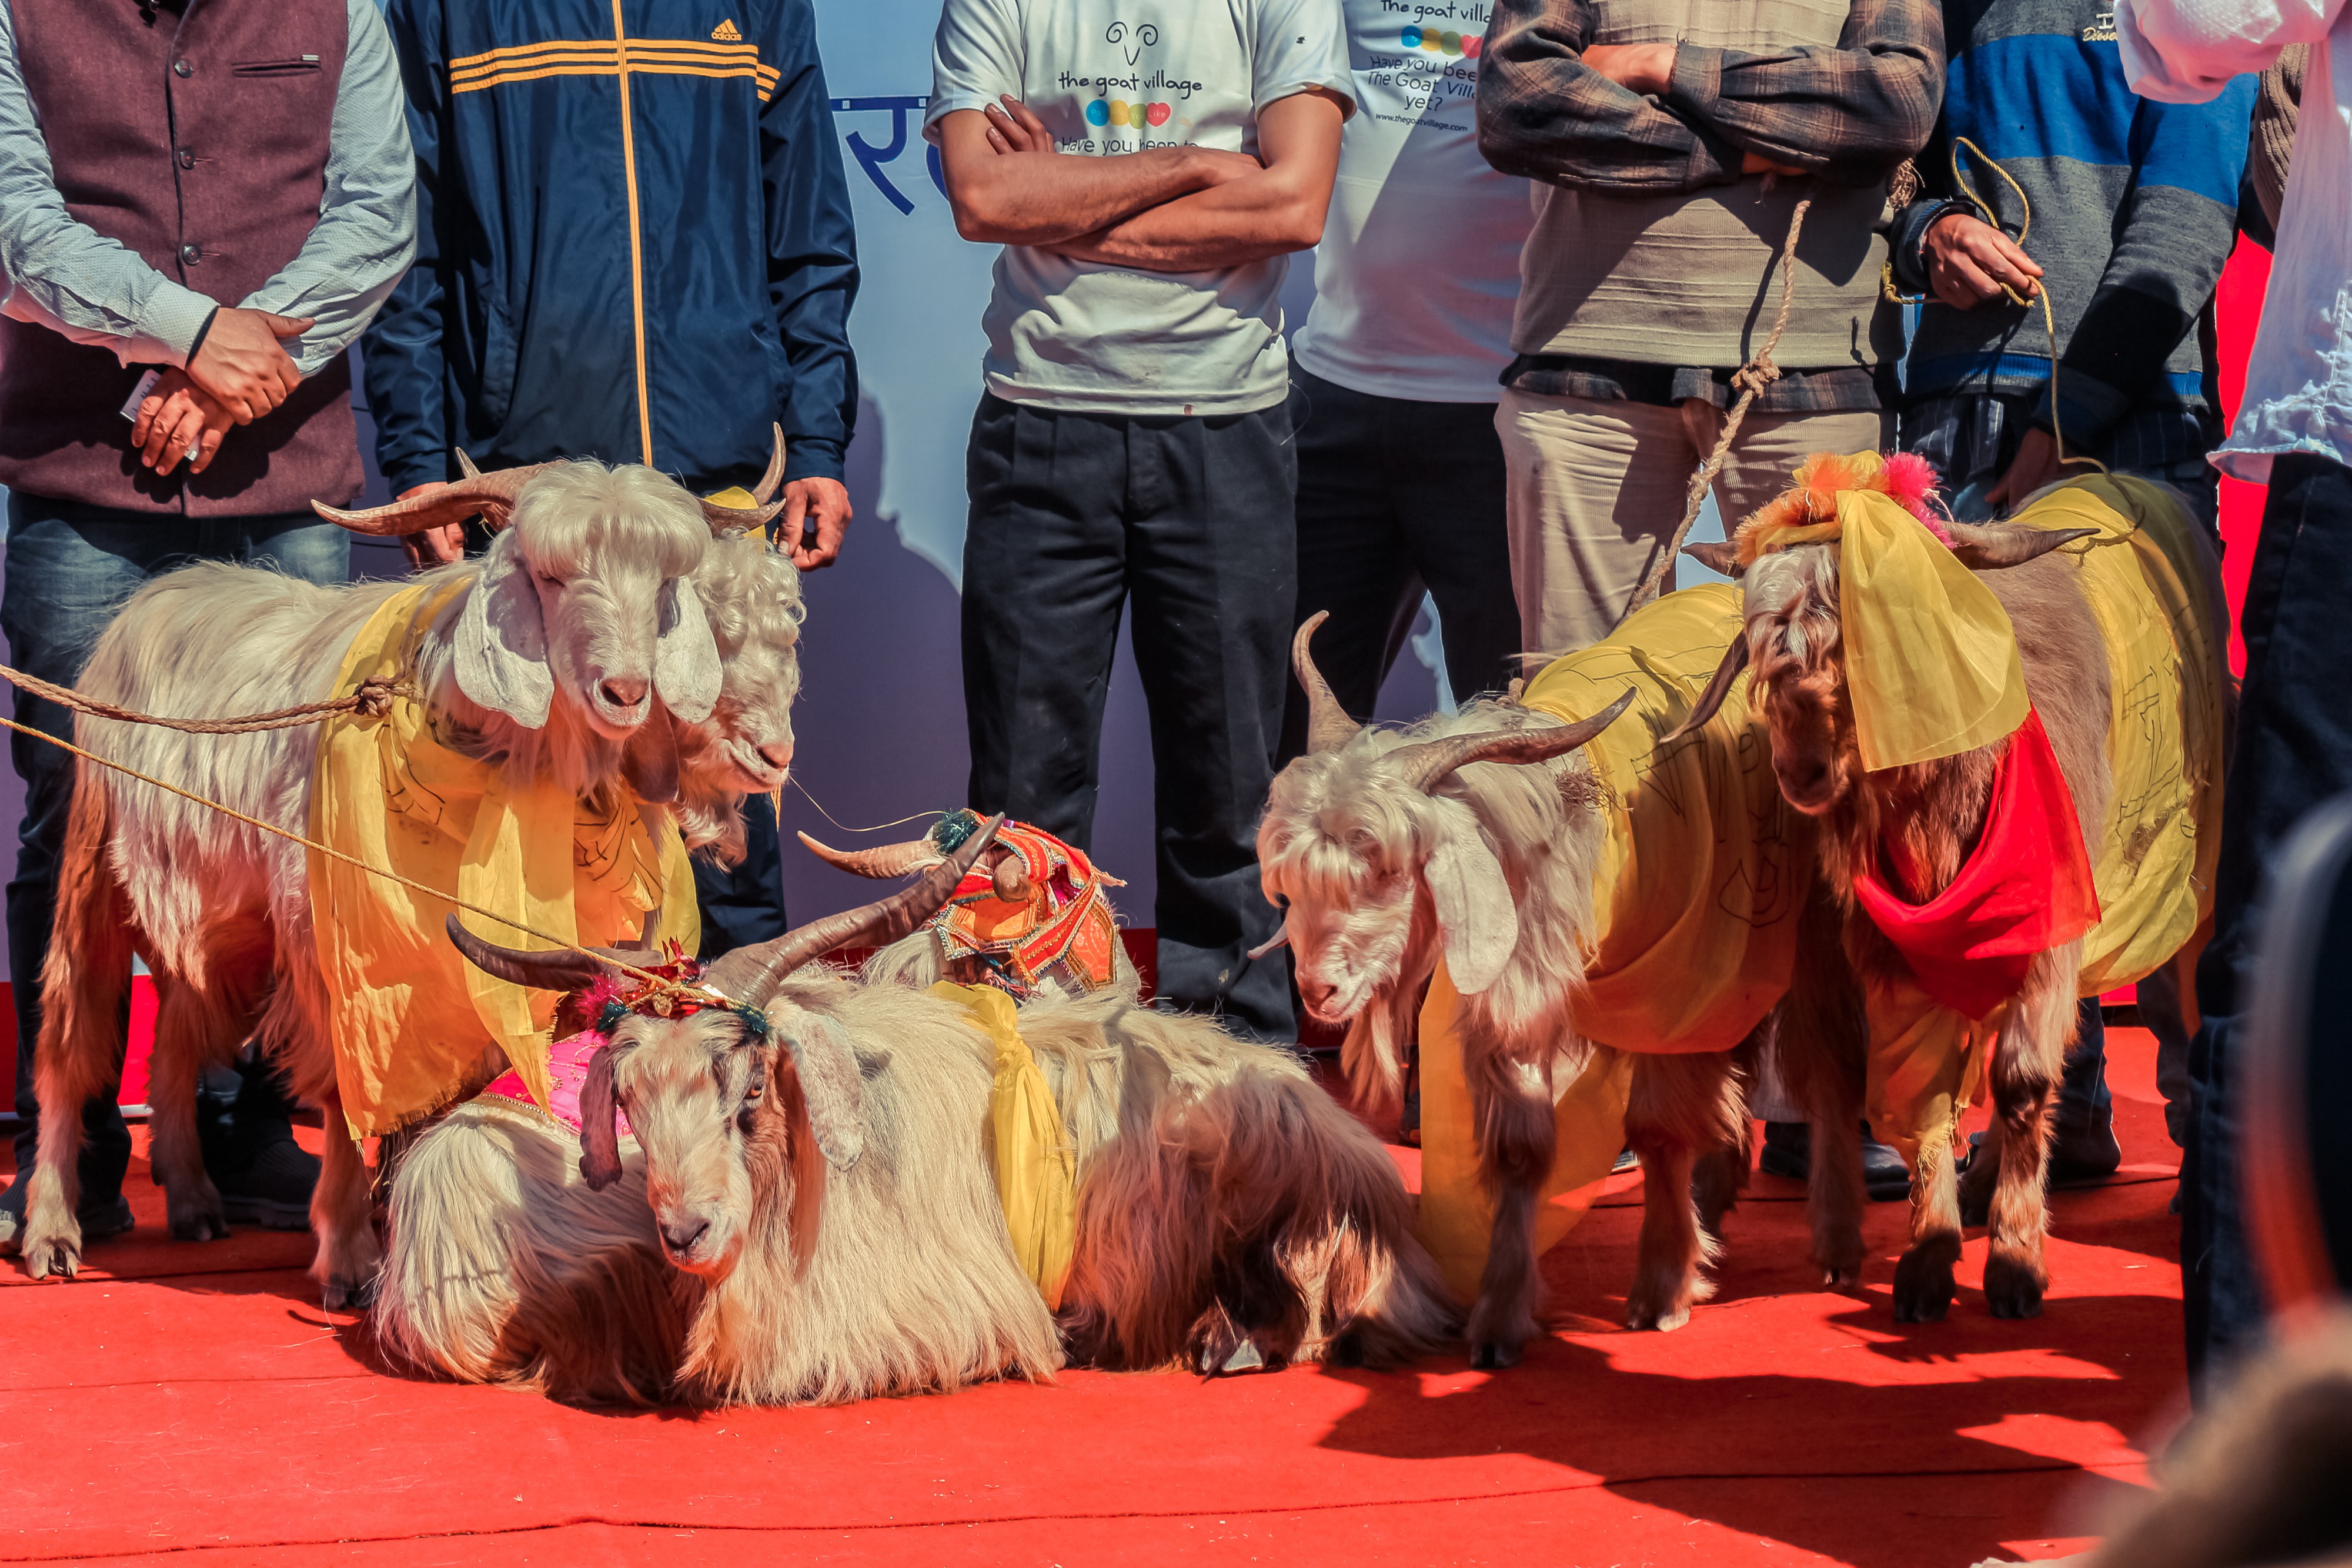 Once in every two years, a grand mass wedding ceremony of goats (yes, goats) from more than 30 villages takes place. Known as Bakri Swayamwar, the event is meant to instill pride in goat farming. Photo courtesy of Prakhar Saraswat